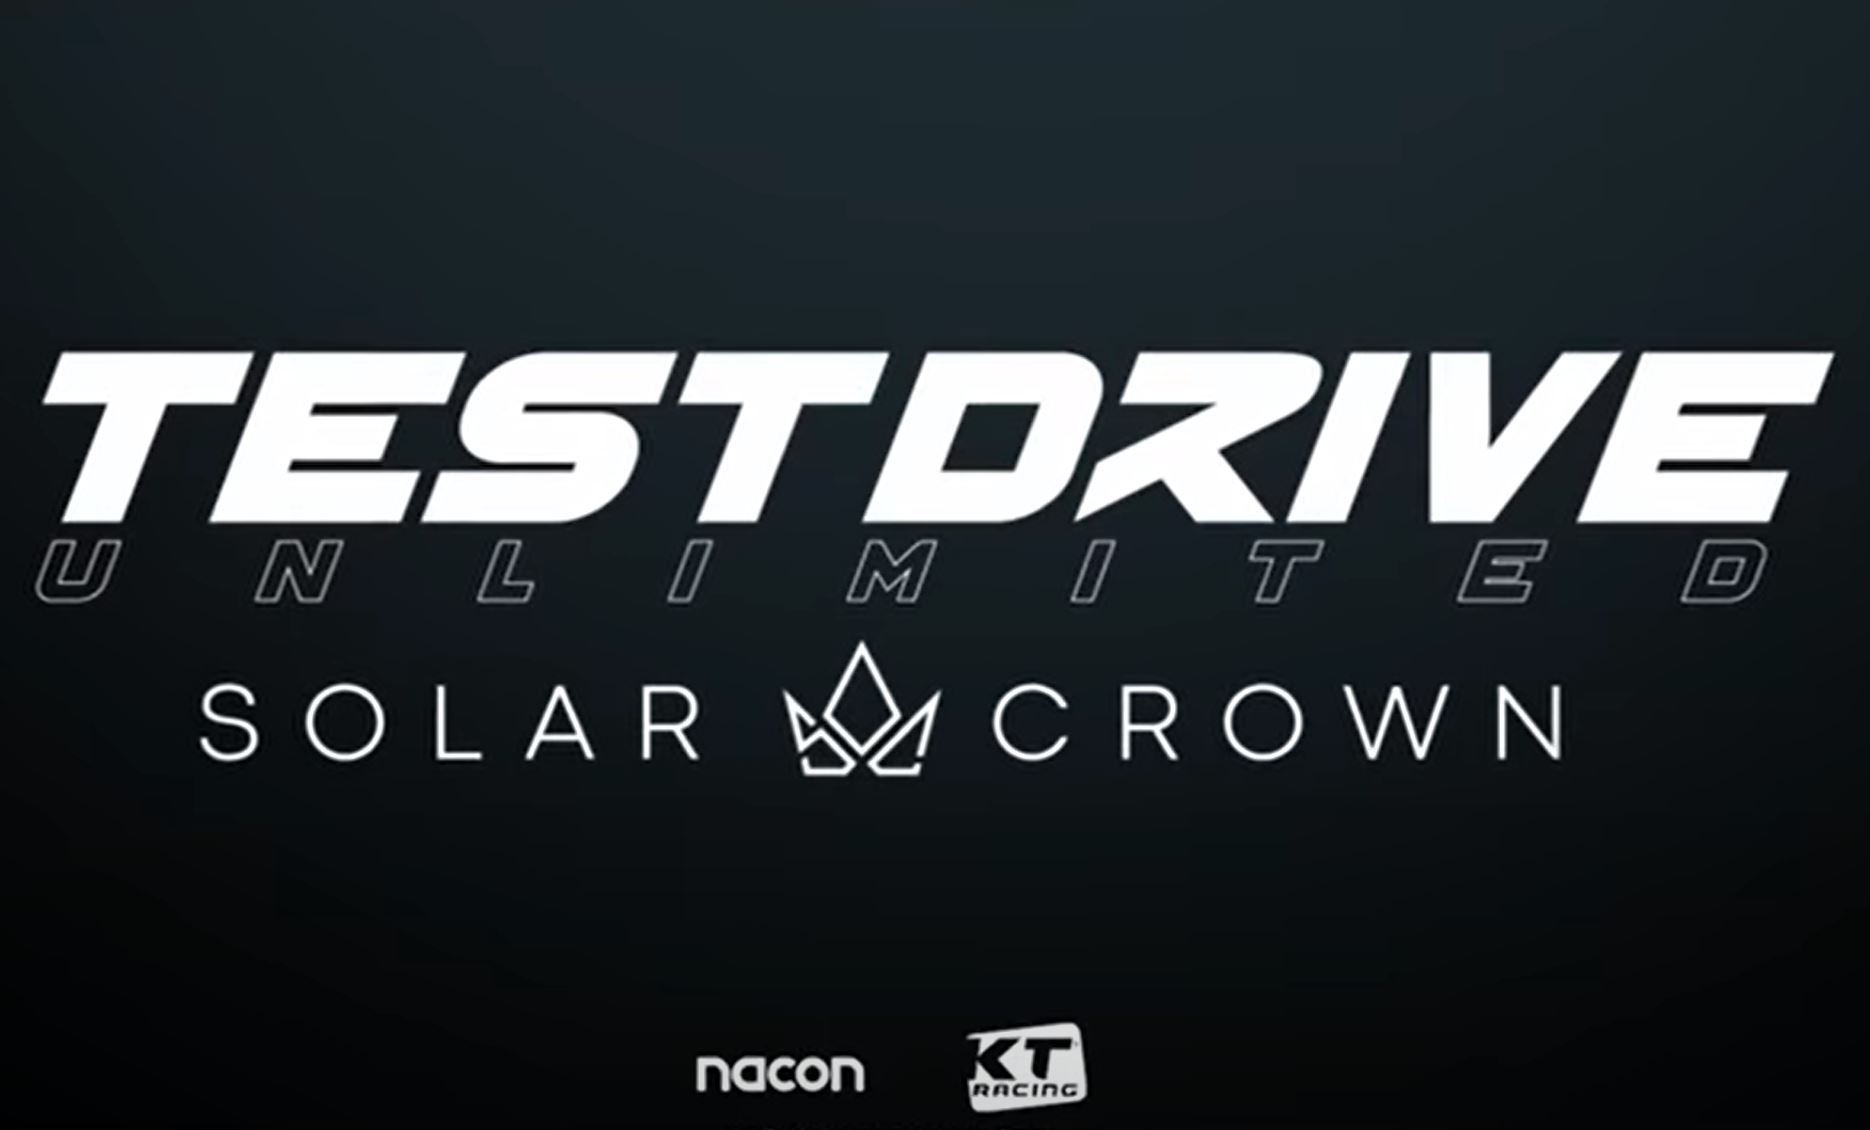 download test drive unlimited solar crown news